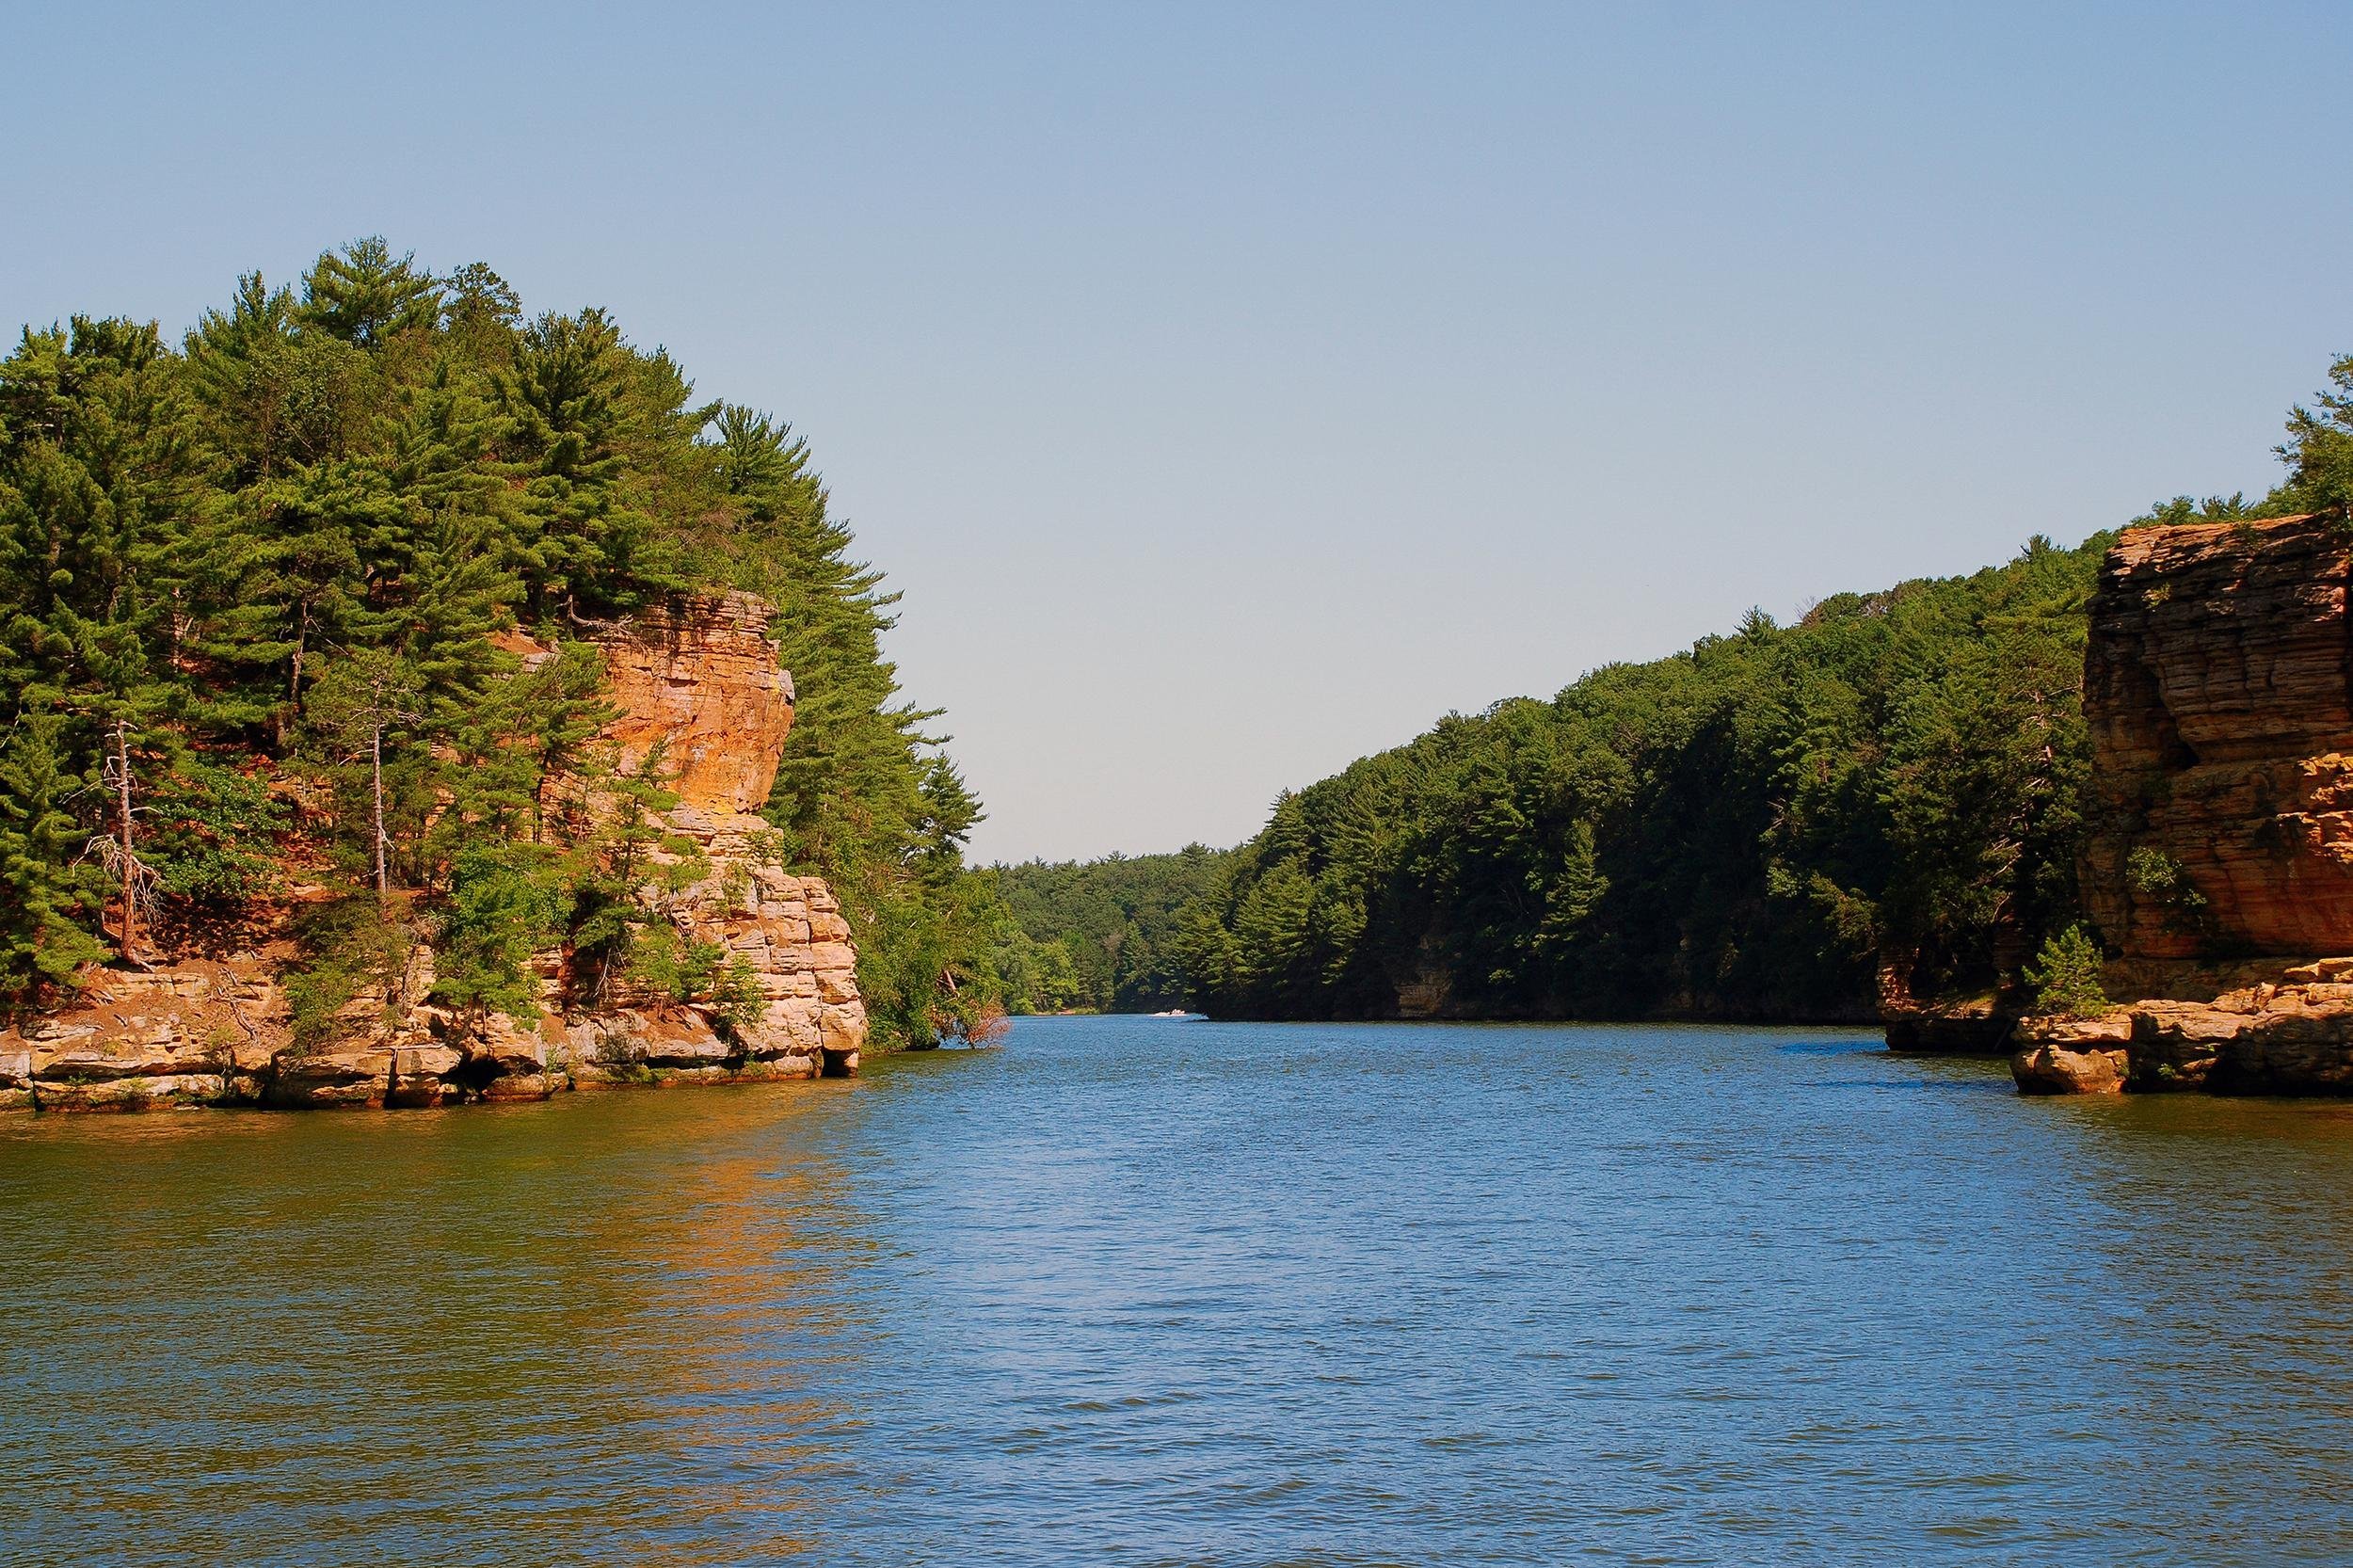 <p>To get a Wisconsin Dells selfie without the crowds of people in waterparks, go to the natural Dells of the Wisconsin River. The jagged rock features lining the shores of the river are a self-portraitist's dream backdrop.   </p>